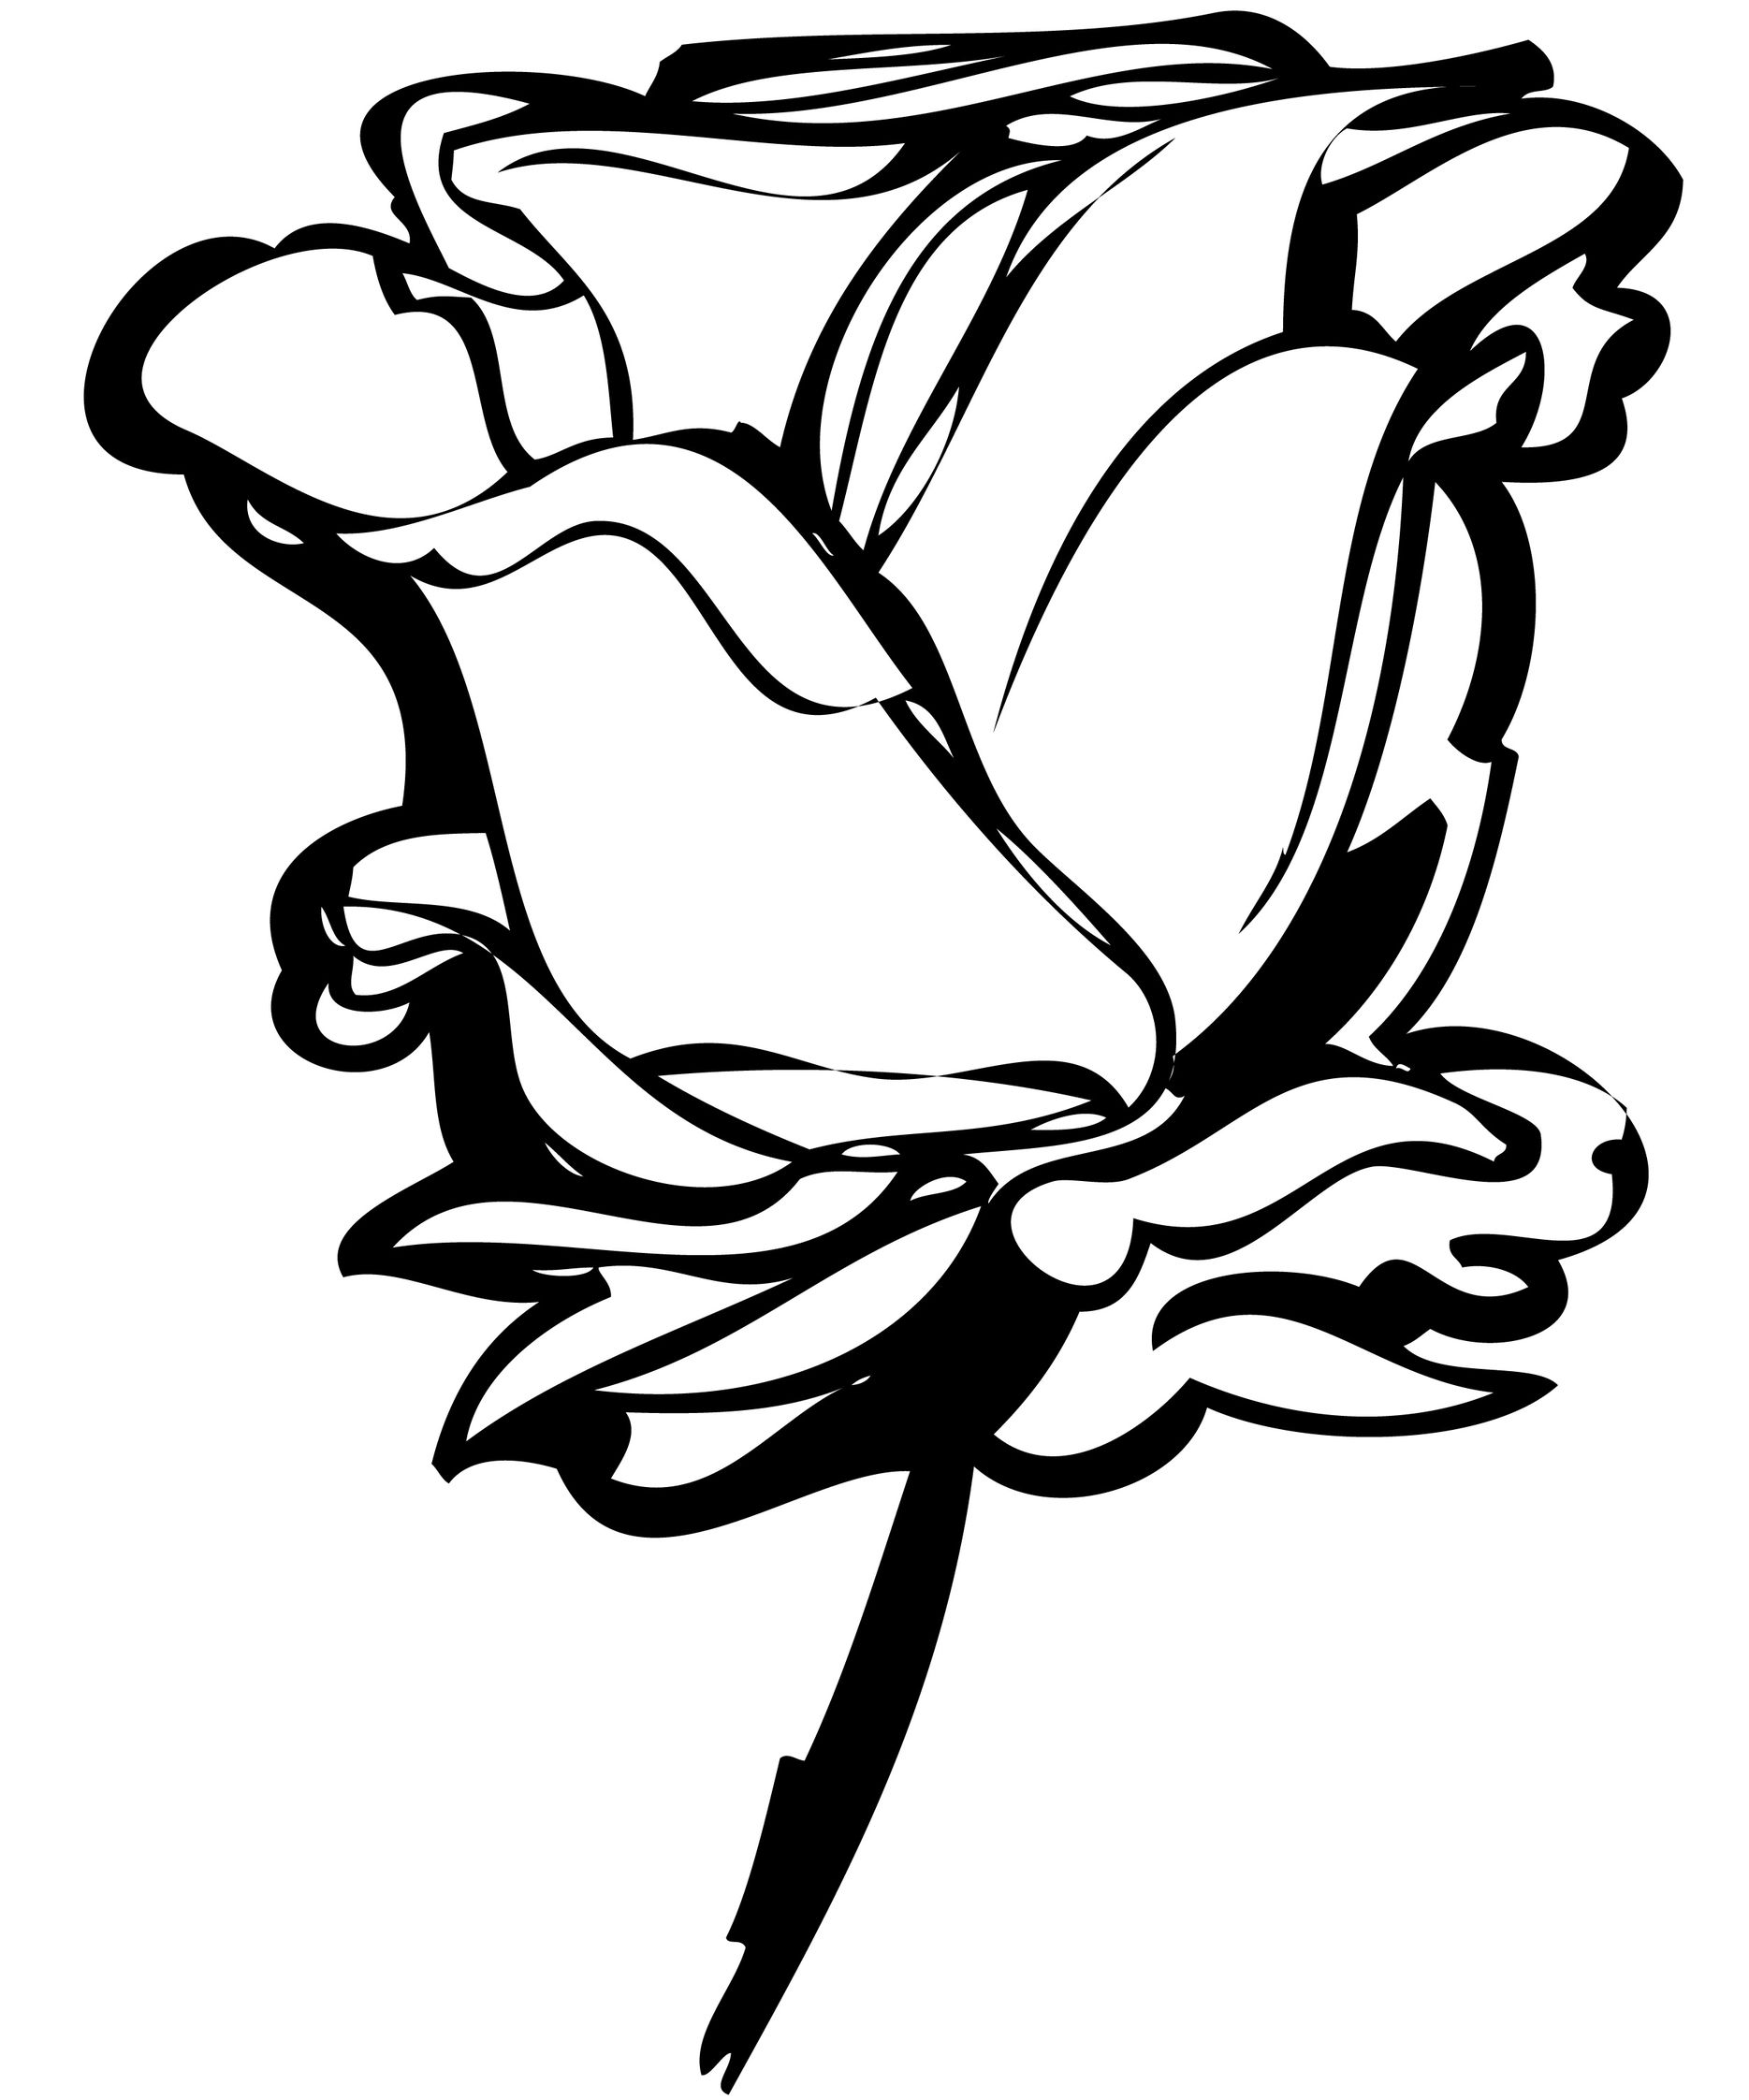 roses clipart black and white - photo #9